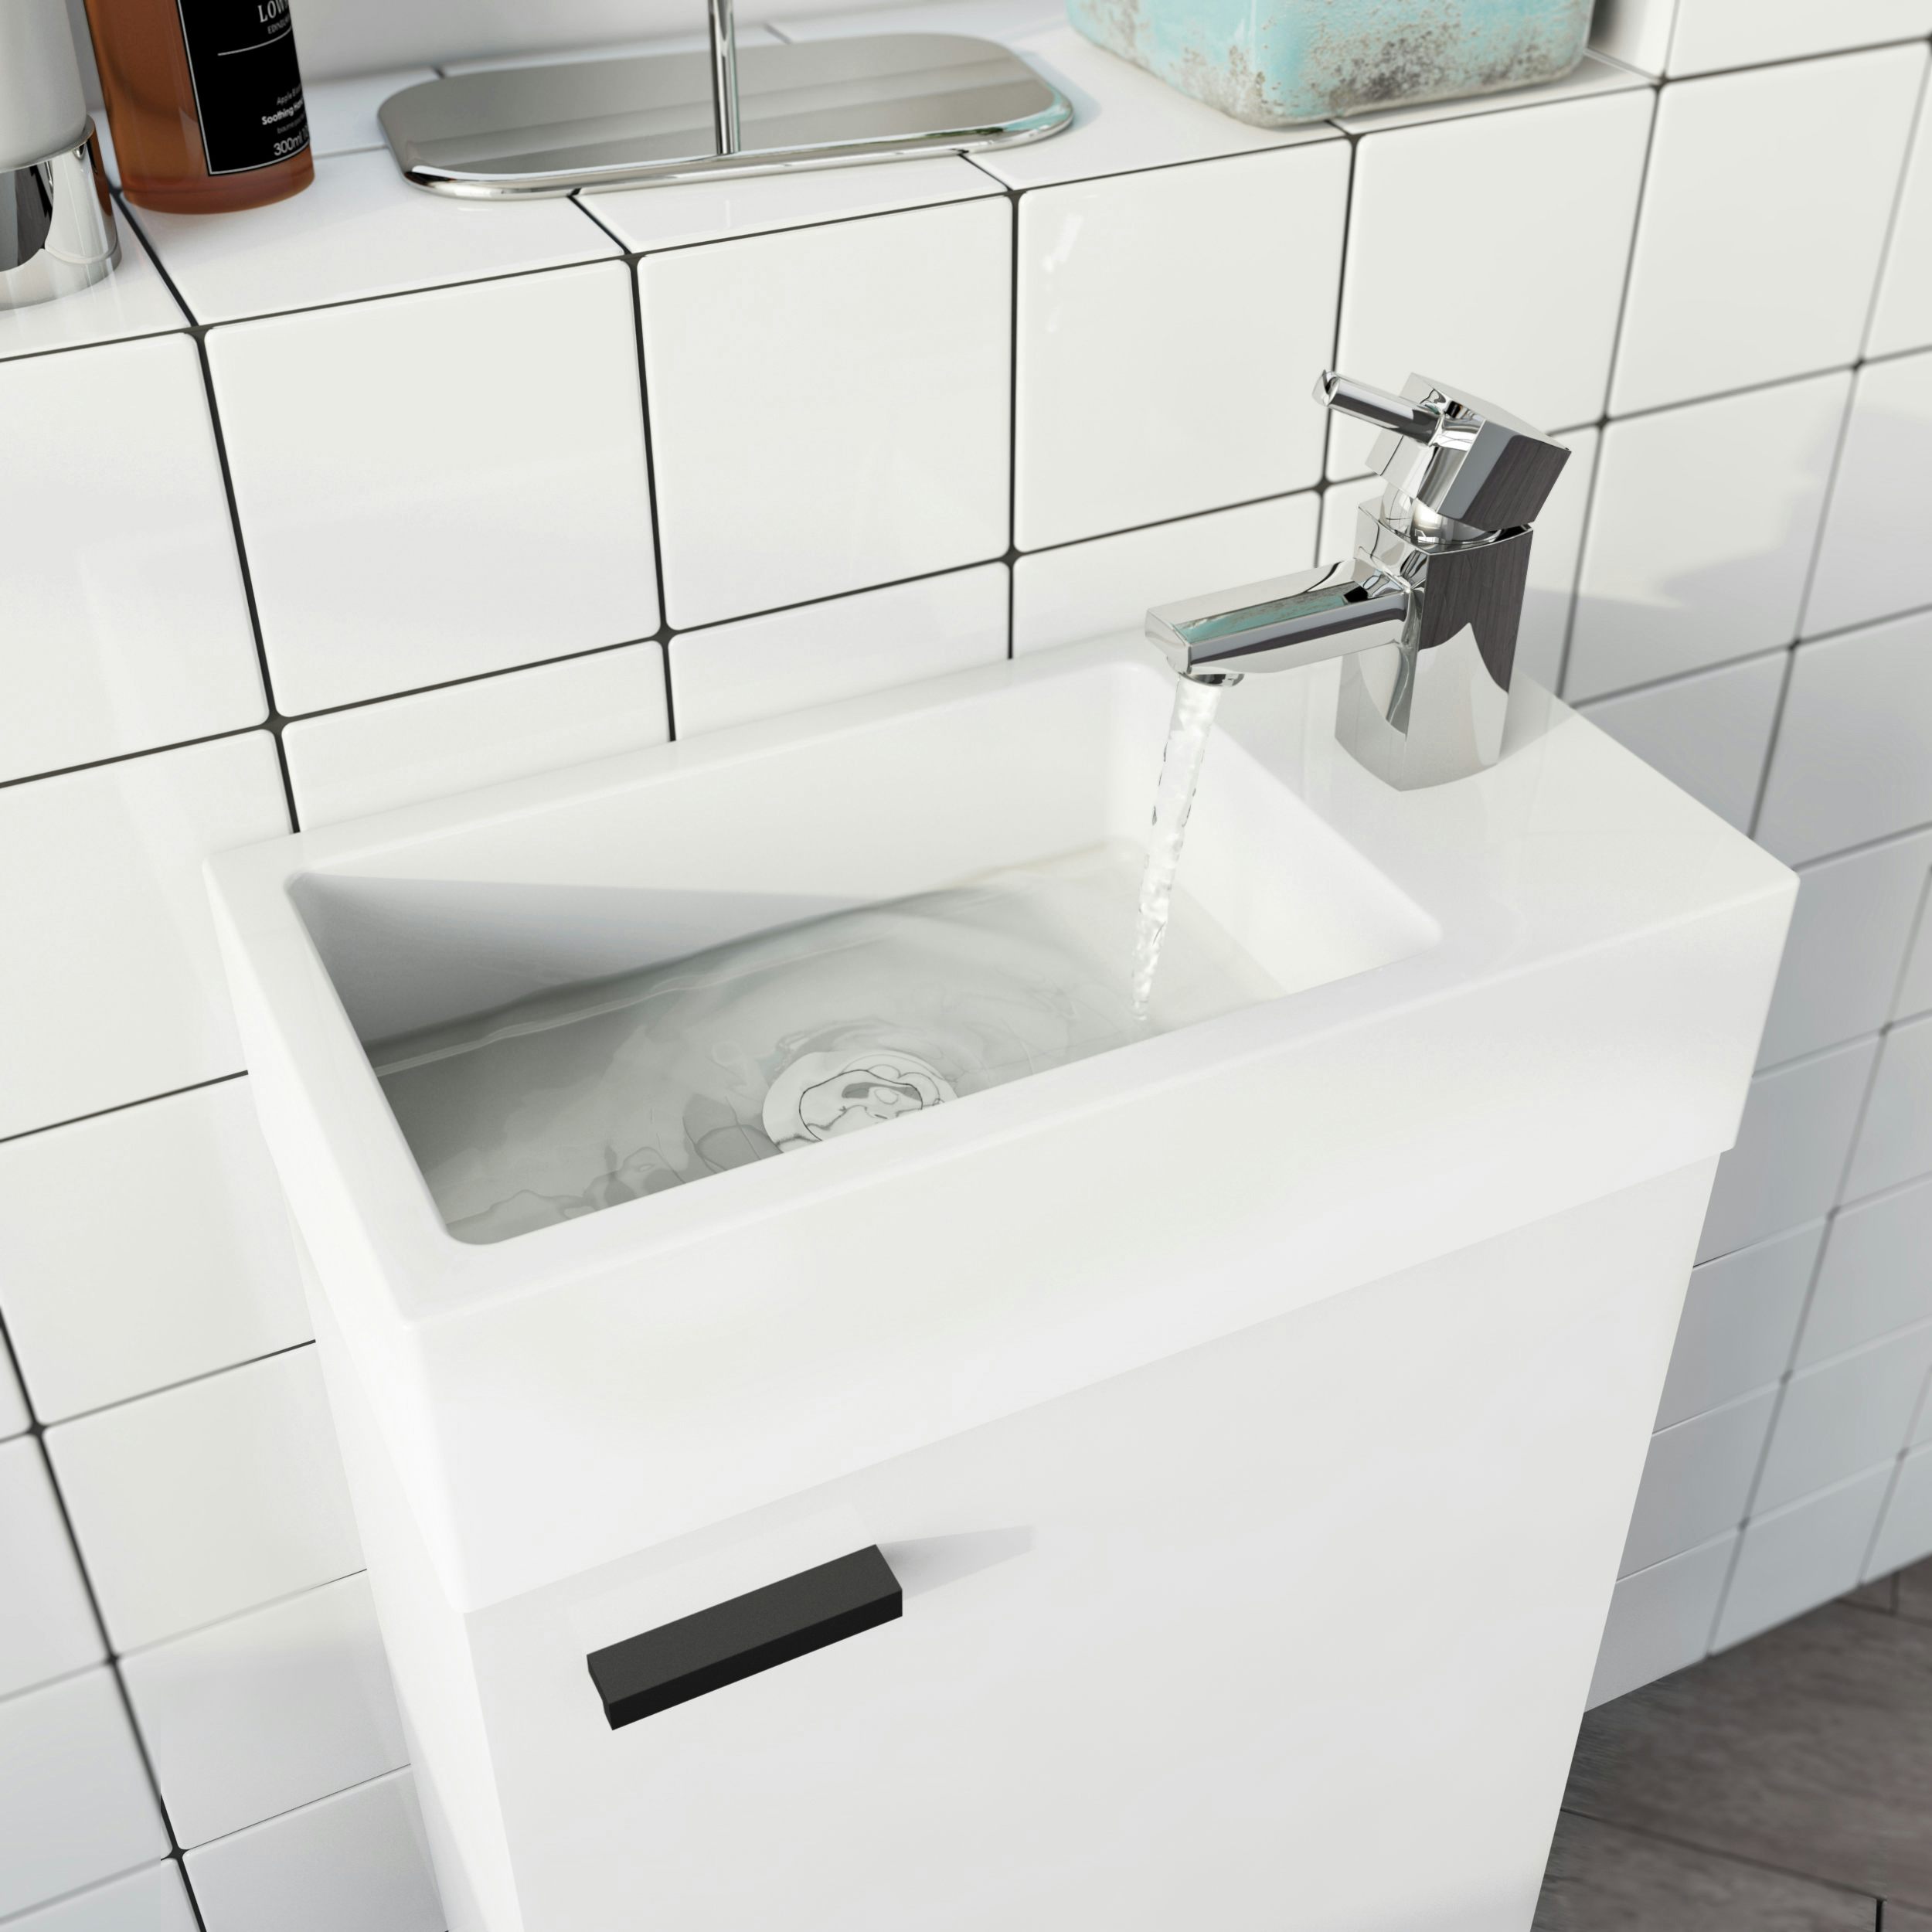 White Gloss Bathroom Vanity Unit Basin Sink Compact Cloakroom Cabinet Basin Tap 